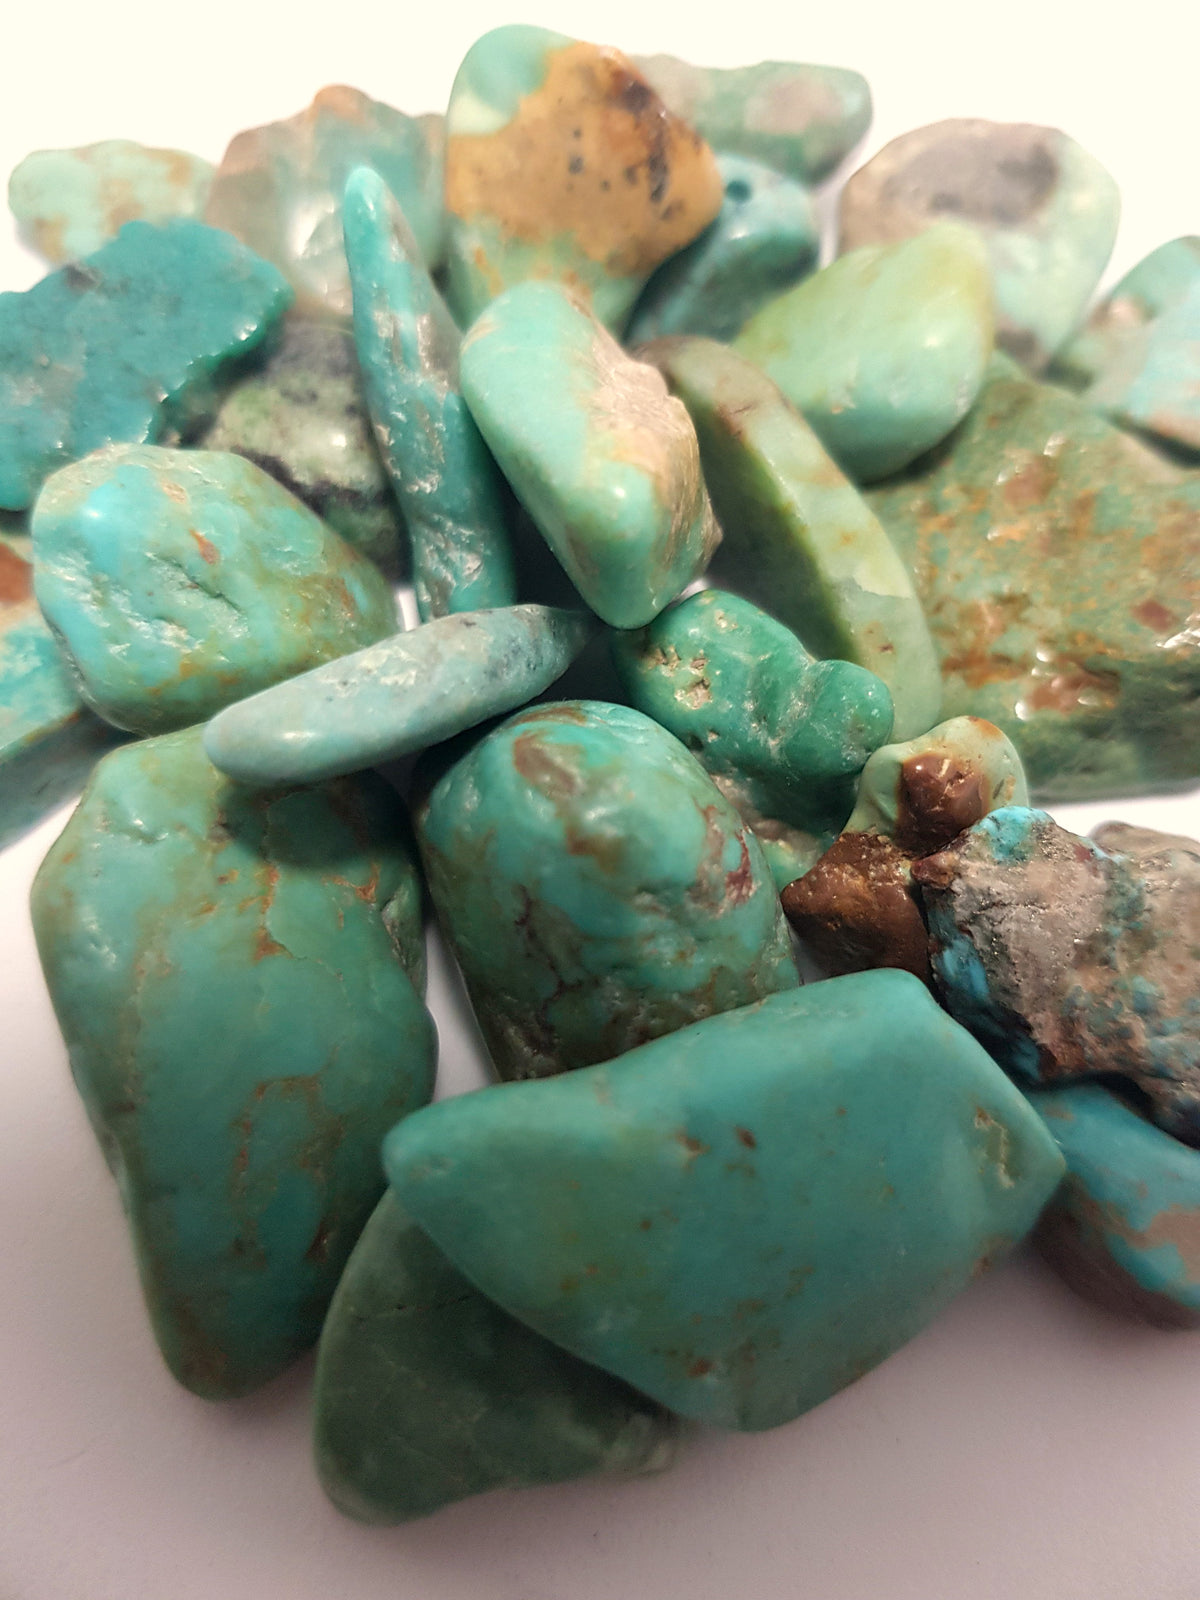 turquoise tumbles. These are irregularly shaped and a good turquoise colour